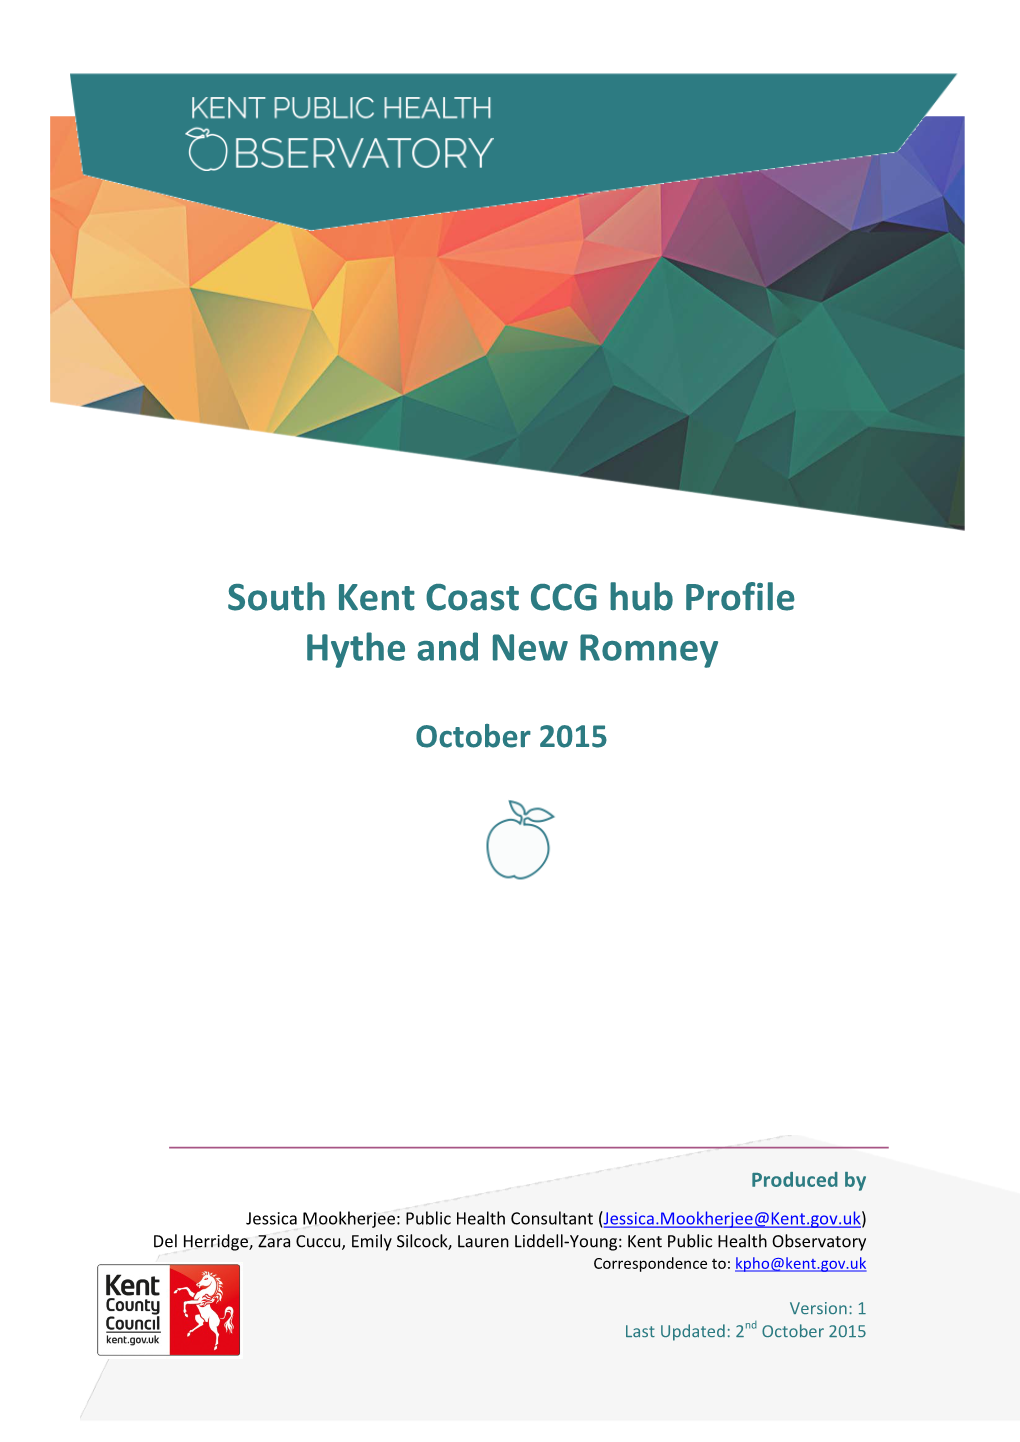 Hythe and New Romney Hub Profile